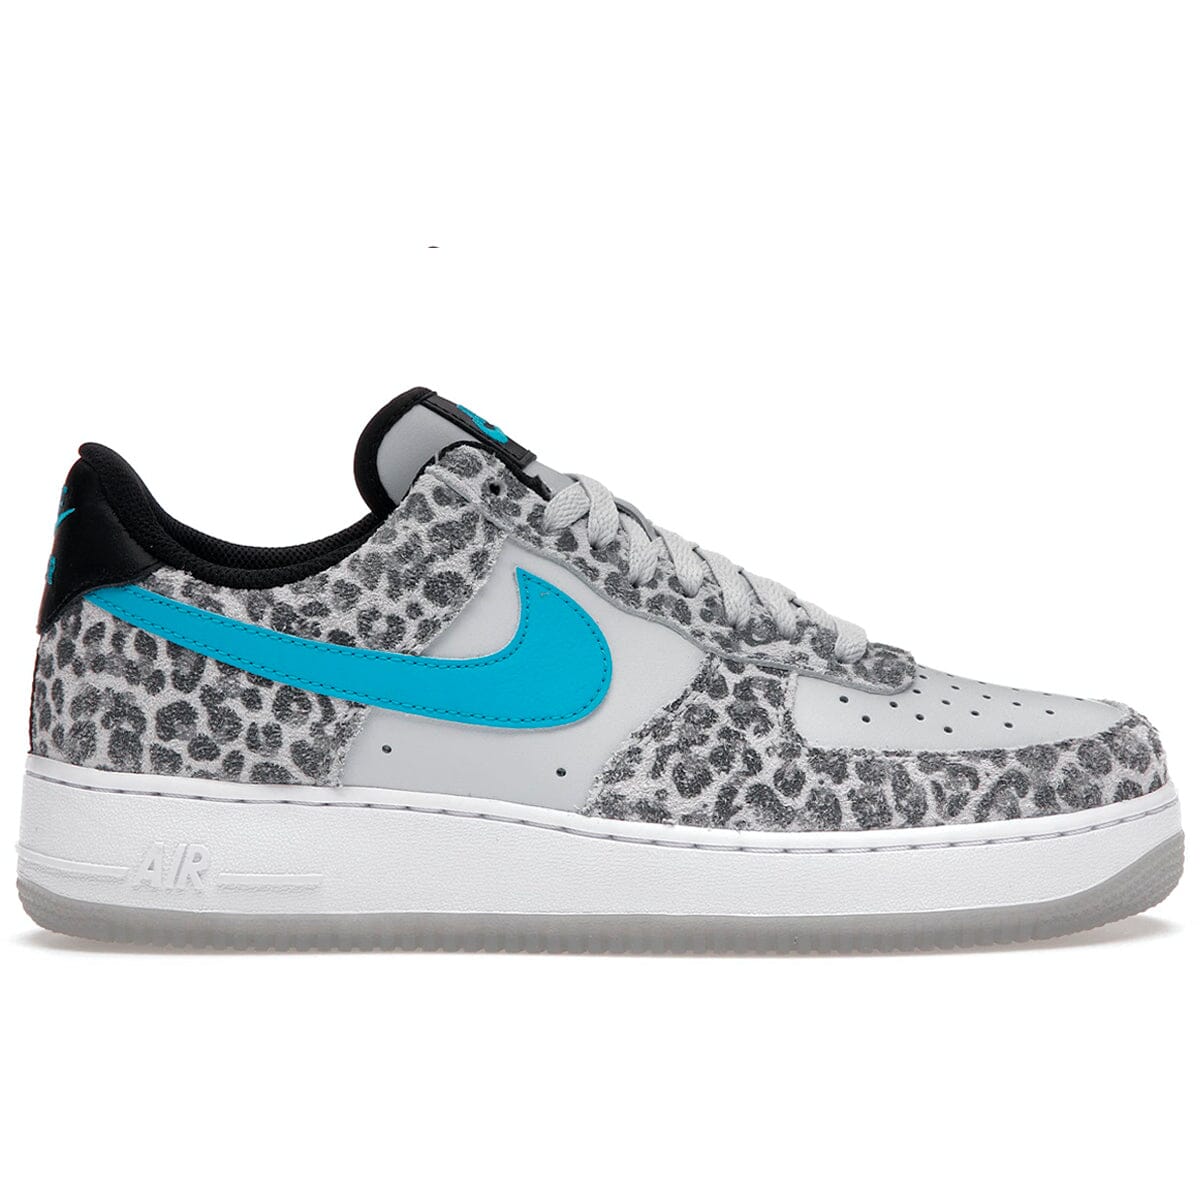 Nike Air Force 1 Low Leopard Air Force 1 Blizz Sneakers 